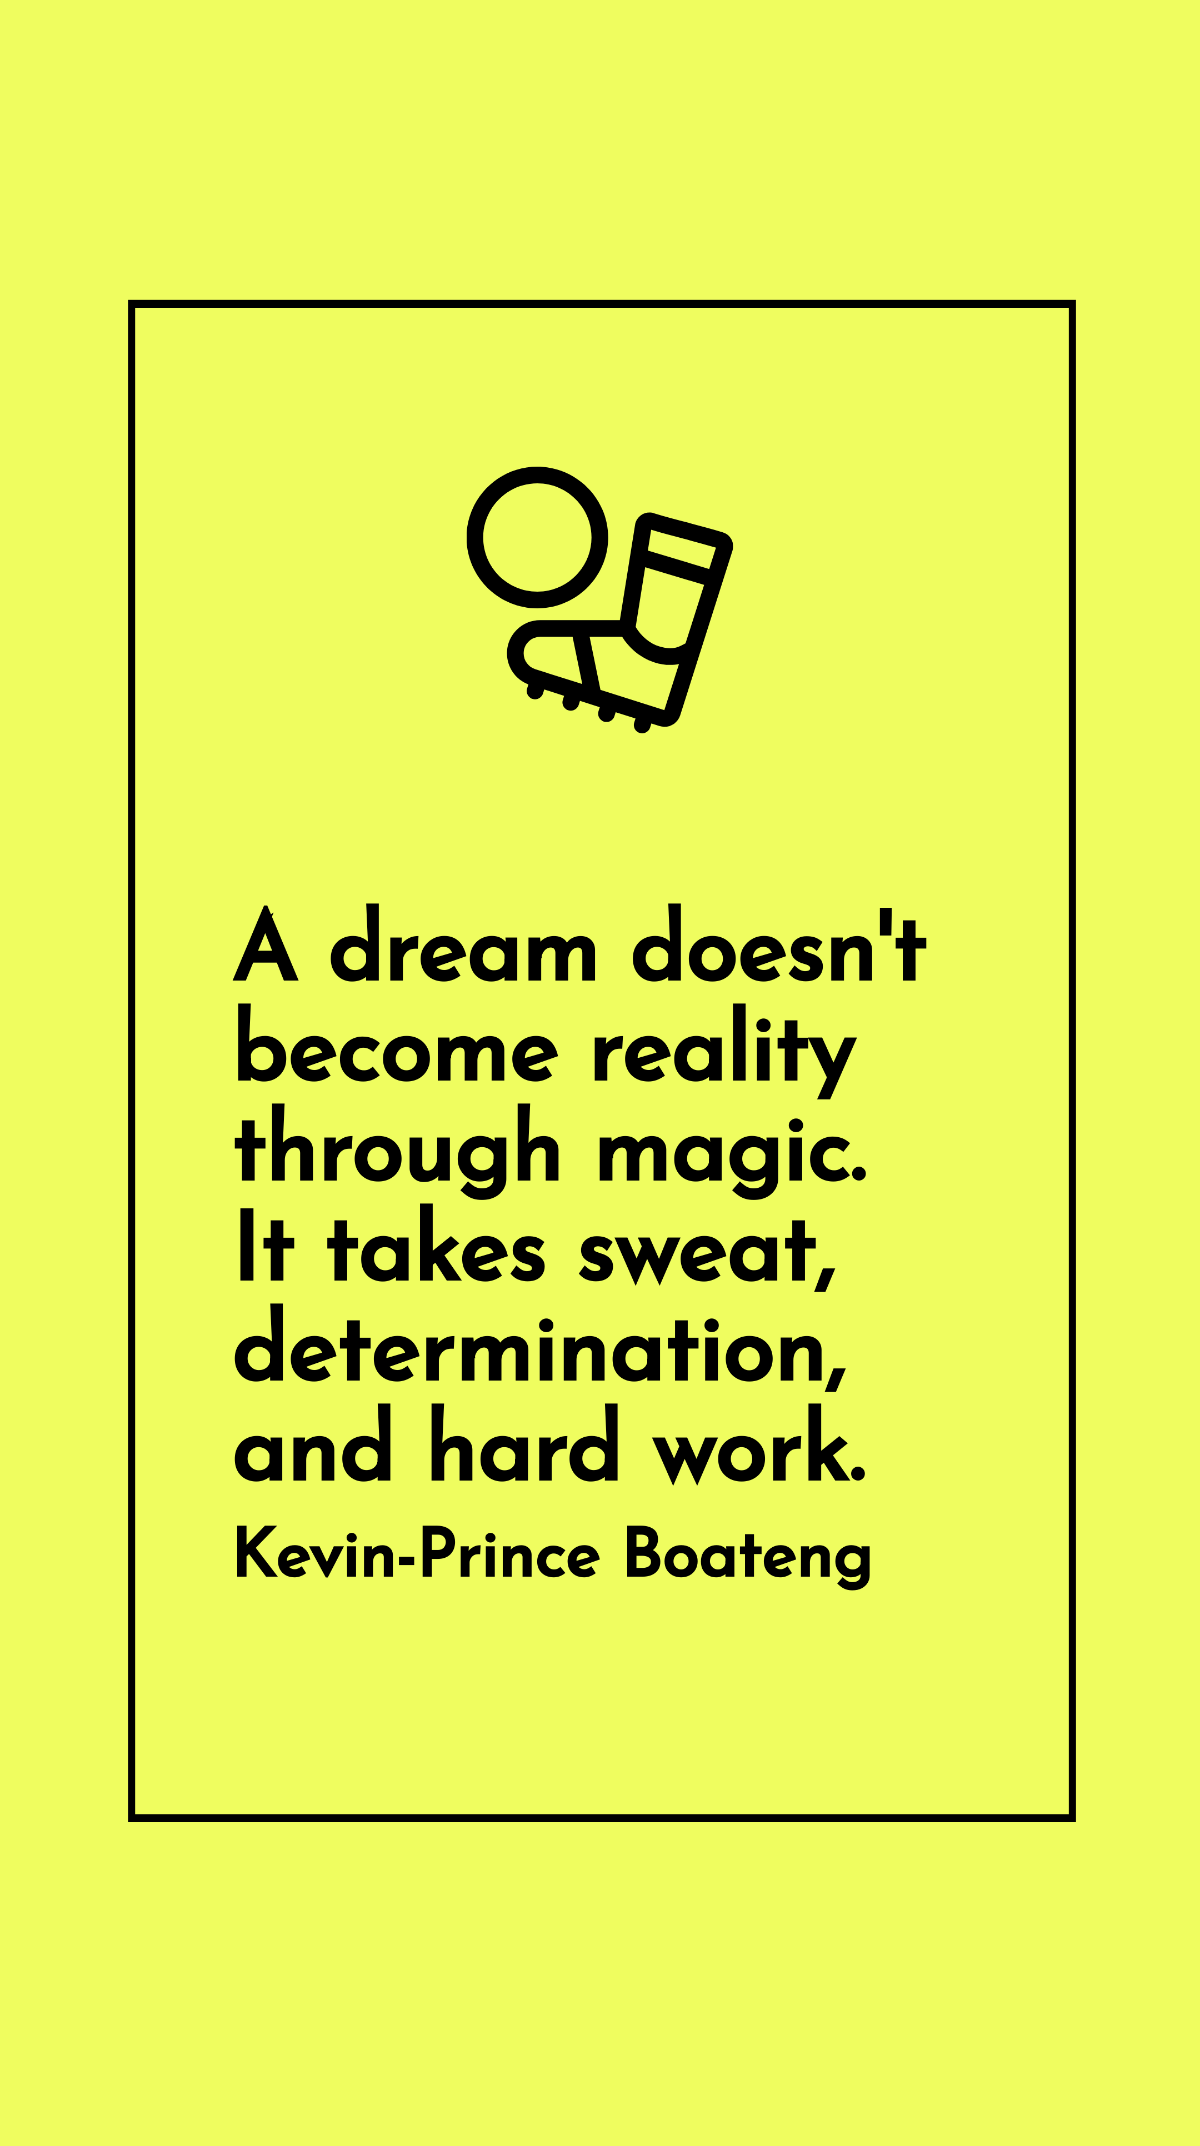 Kevin-Prince Boateng - A dream doesn't become reality through magic. It takes sweat, determination, and hard work. Template